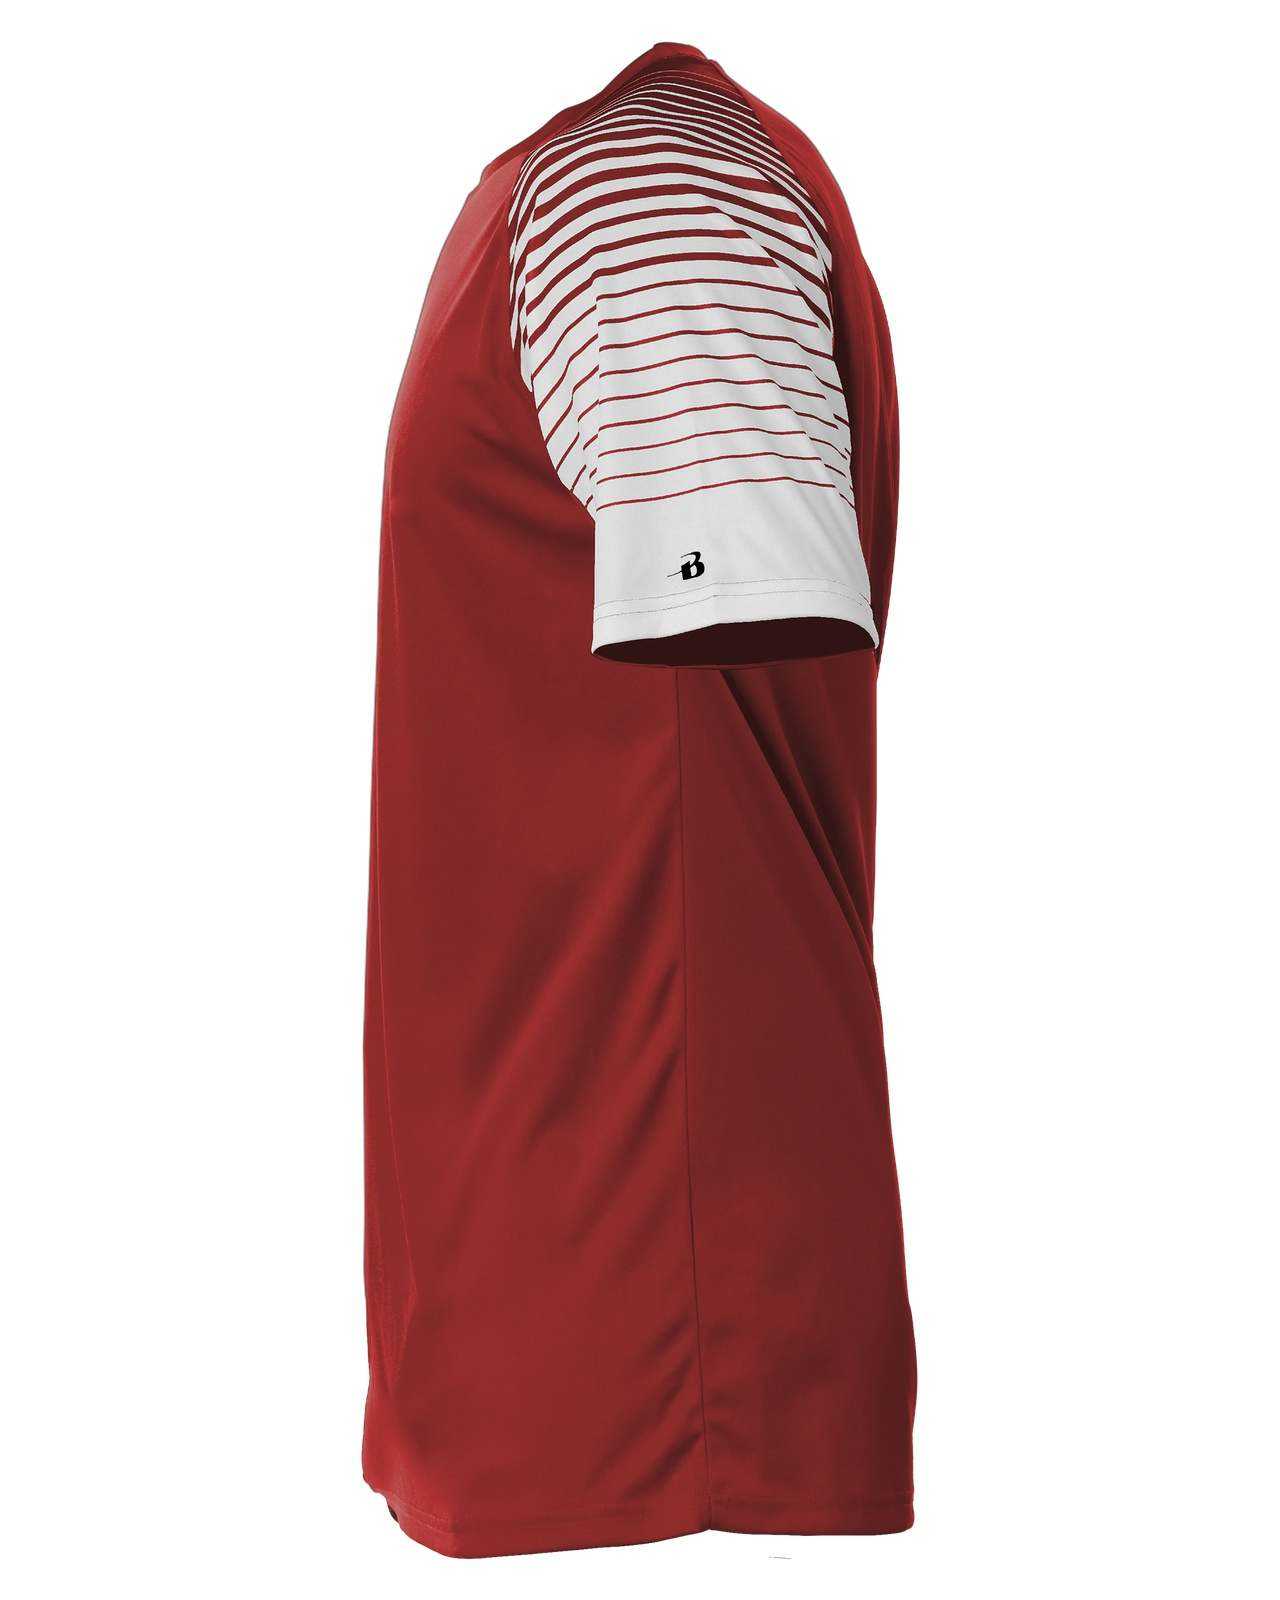 Badger Sport 2210 Lineup Youth Tee - Red - HIT a Double - 1